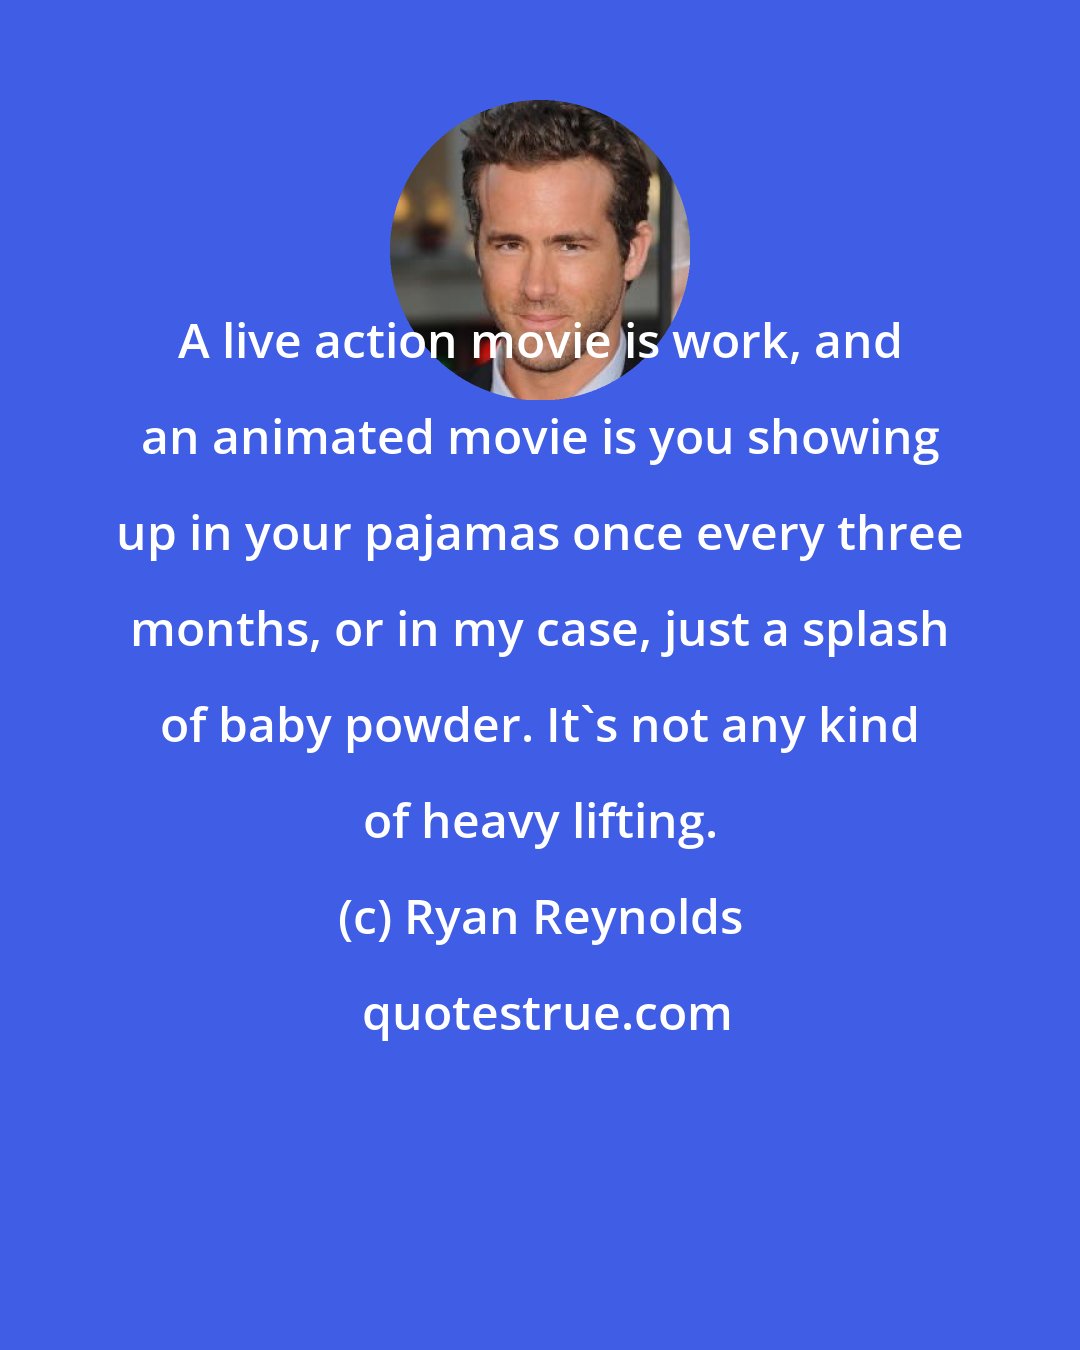 Ryan Reynolds: A live action movie is work, and an animated movie is you showing up in your pajamas once every three months, or in my case, just a splash of baby powder. It's not any kind of heavy lifting.